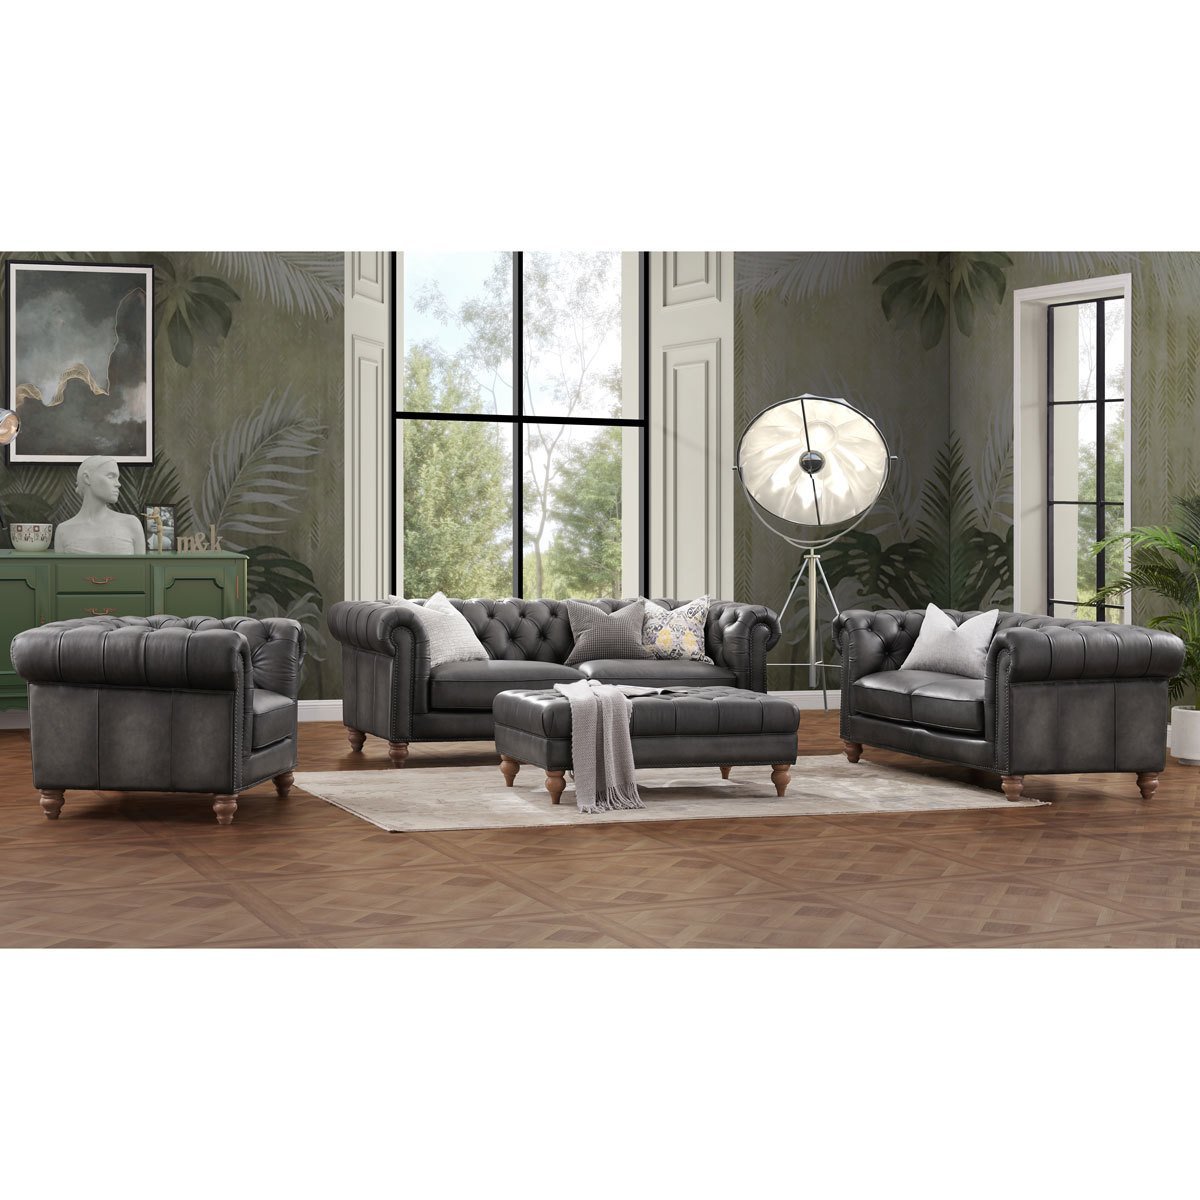 Allington 3 Seater Grey Leather Chesterfield Sofa - Signature Retail Stores